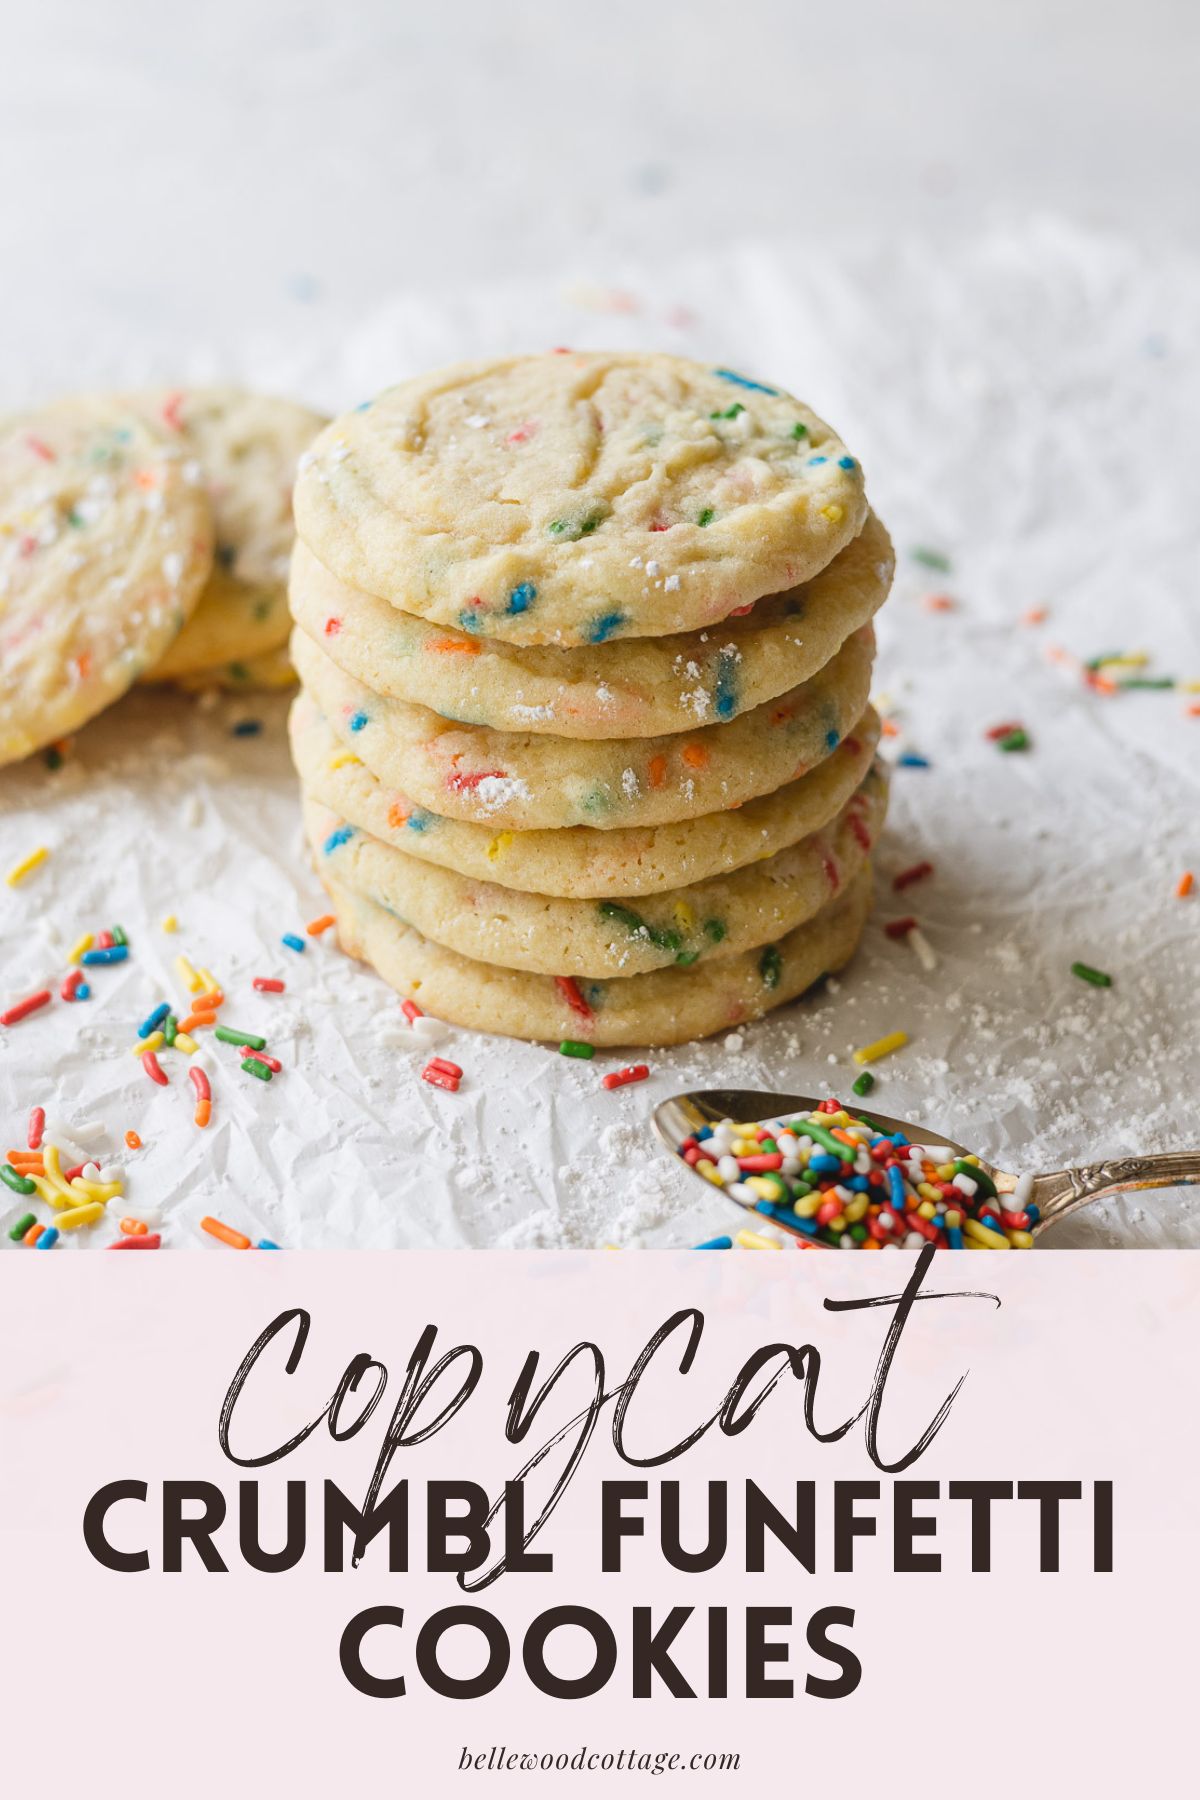 A stack of funfetti cookies and a spoonful of sprinkles with the words, "copycat Crumbl funfetti cookies".